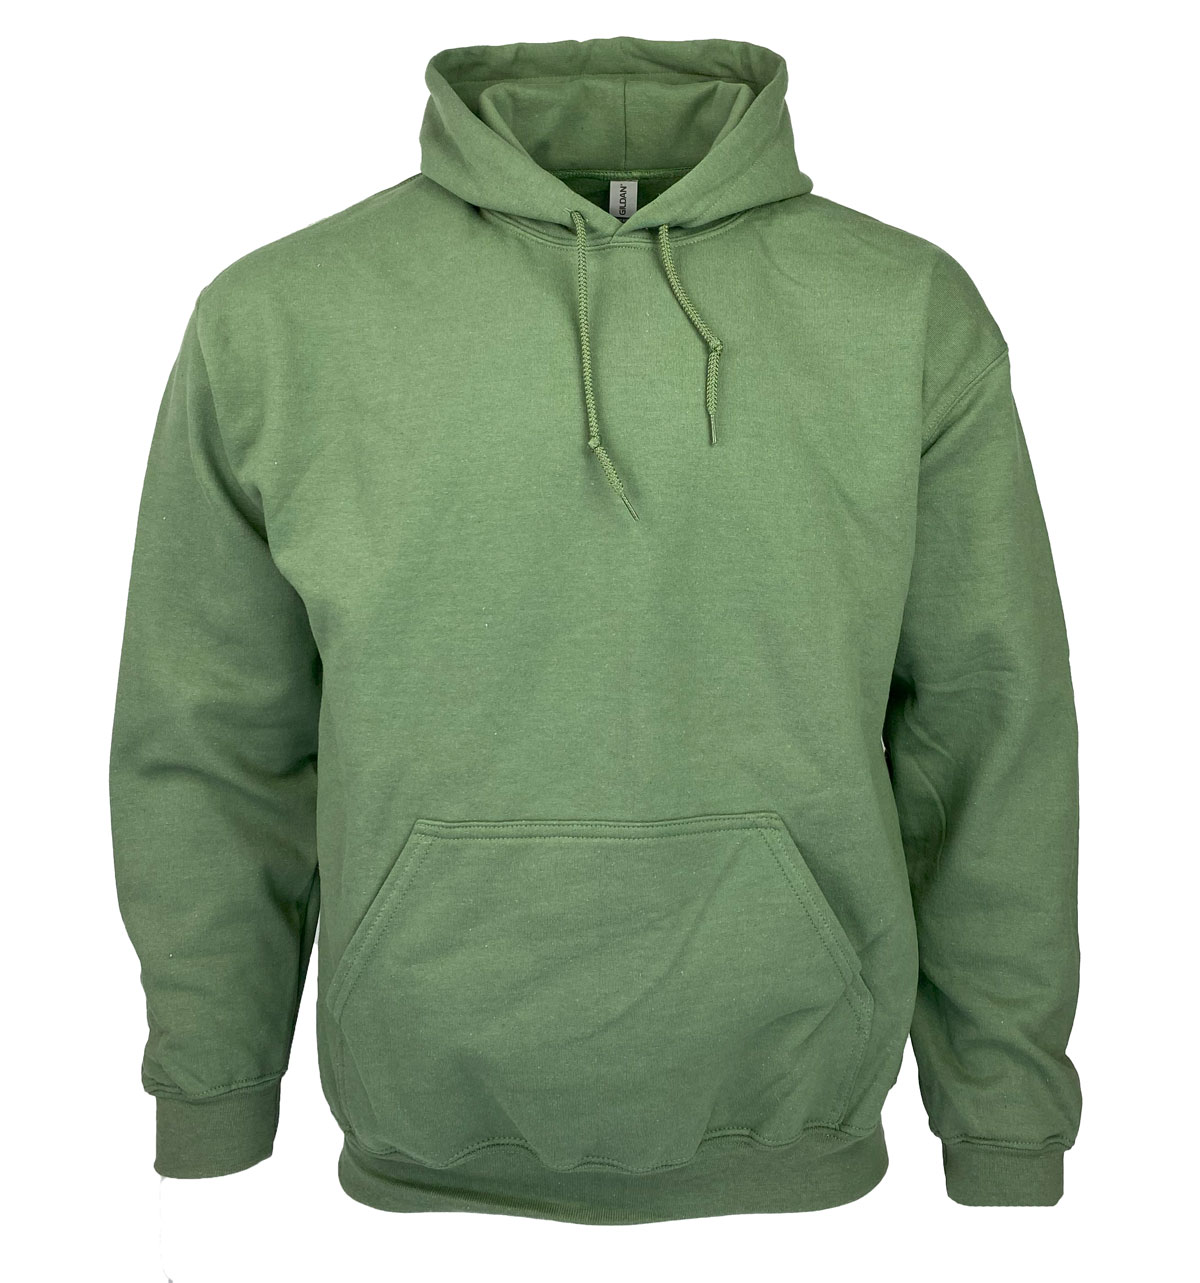 RG Riley Wholesale Off Price Clothing & Closeout Apparel